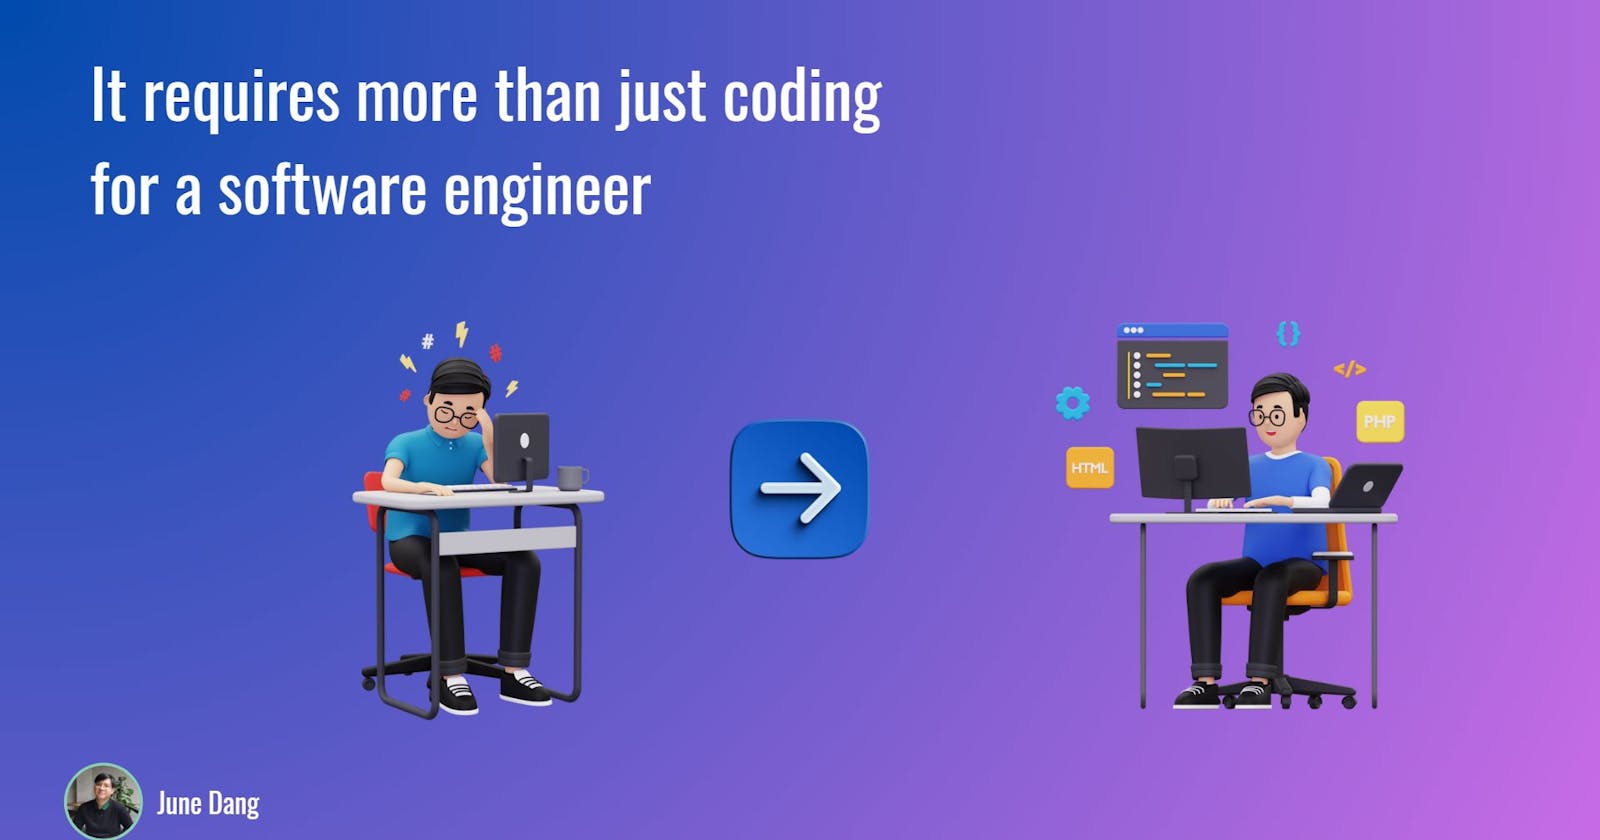 It requires more than just coding for a software engineer